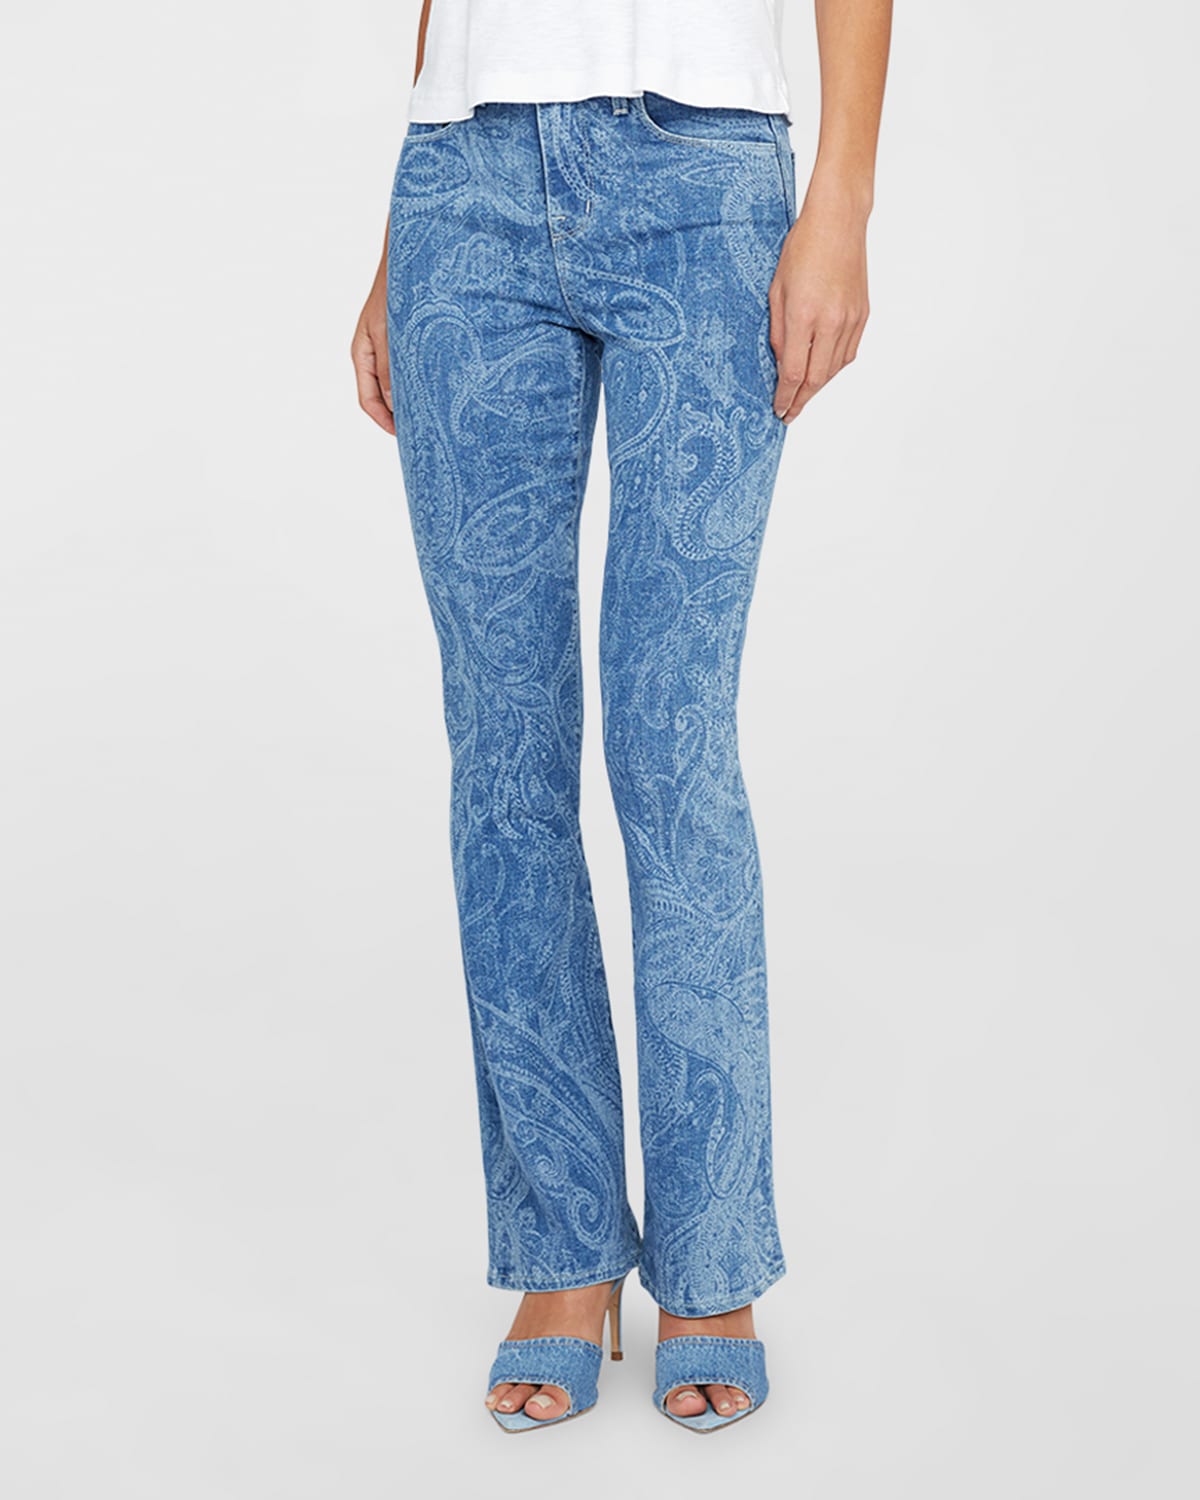 L Agence Stassi High-rise Sleek Baby Bootcut Jeans In Paisley Laser